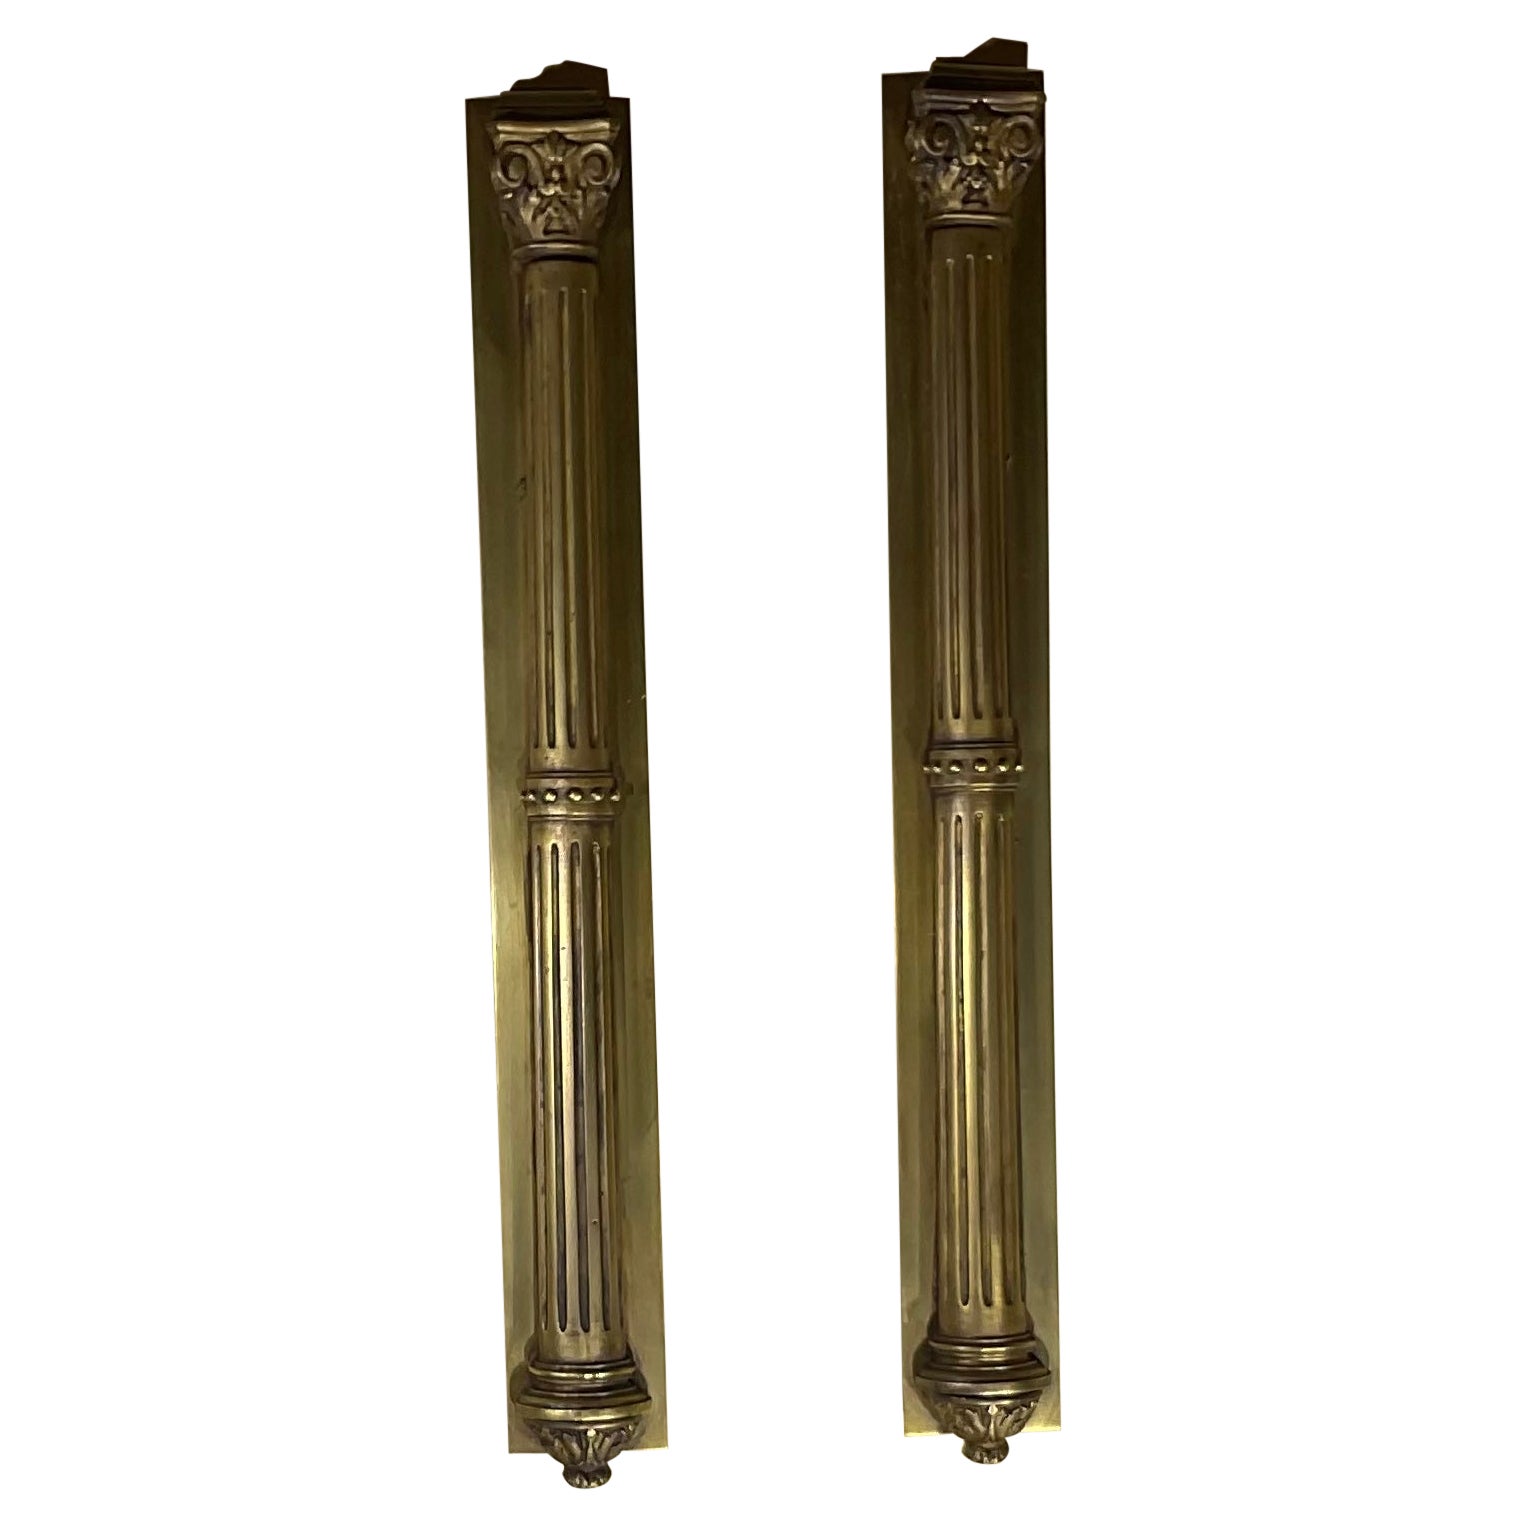 Pair of 19th Century Brass and Bronze Wall Hanging Ornament